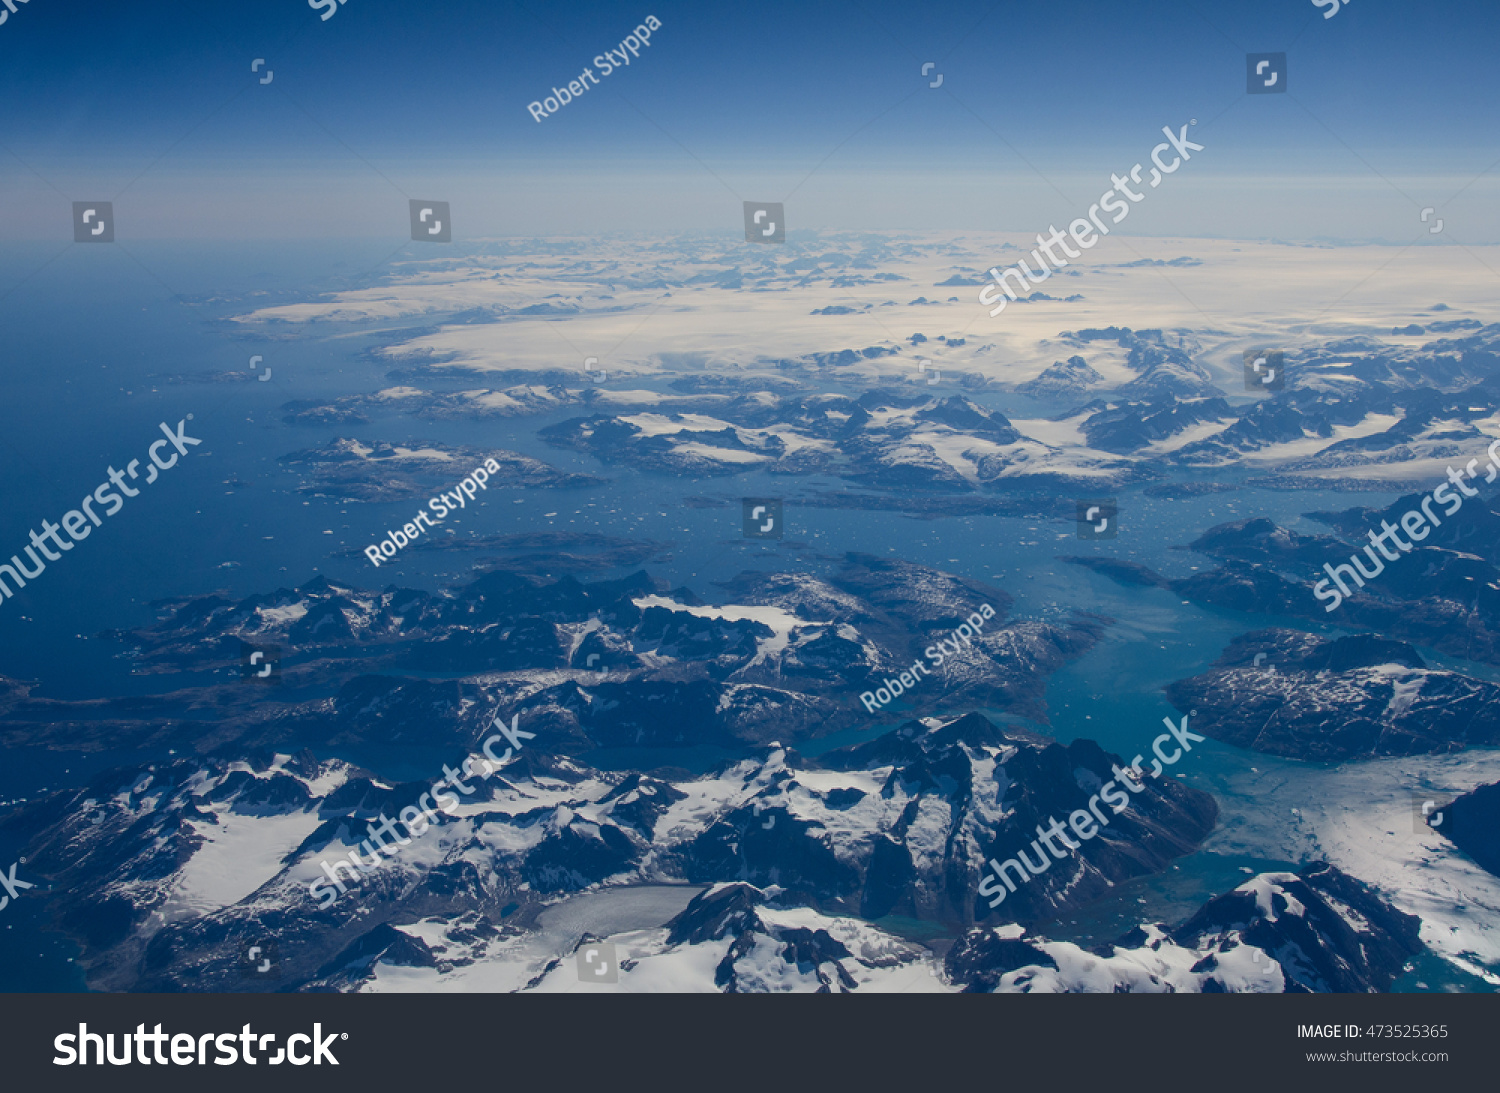 Greenland from above #473525365